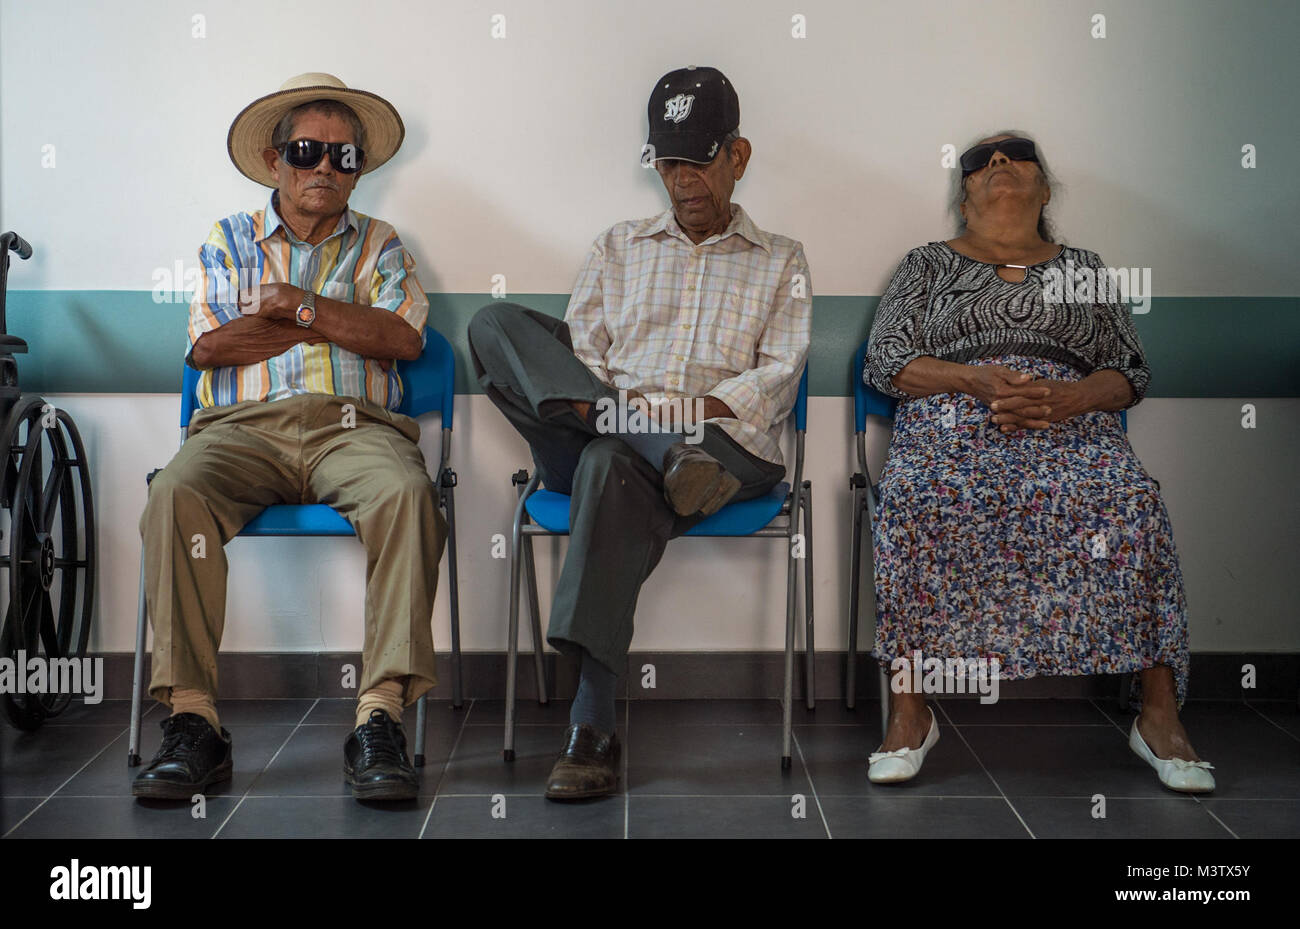 Post-operation patients wait to be seen at the Centro Hospitalario Luis 'Chicho' Fabrega during a medical readiness training exercise in Santiago, Panama, Feb. 7, 2017. A U.S. military medical team was in Panama to help treat individuals with cataracts that otherwise would have gone untreated. Medical readiness training exercises provide U.S. military personnel training in delivery of medical care in austere conditions, promote diplomatic relations between the U.S. and host nations in Central America and provide humanitarian and civic assistance via a long-term proactive program. These exercis Stock Photo